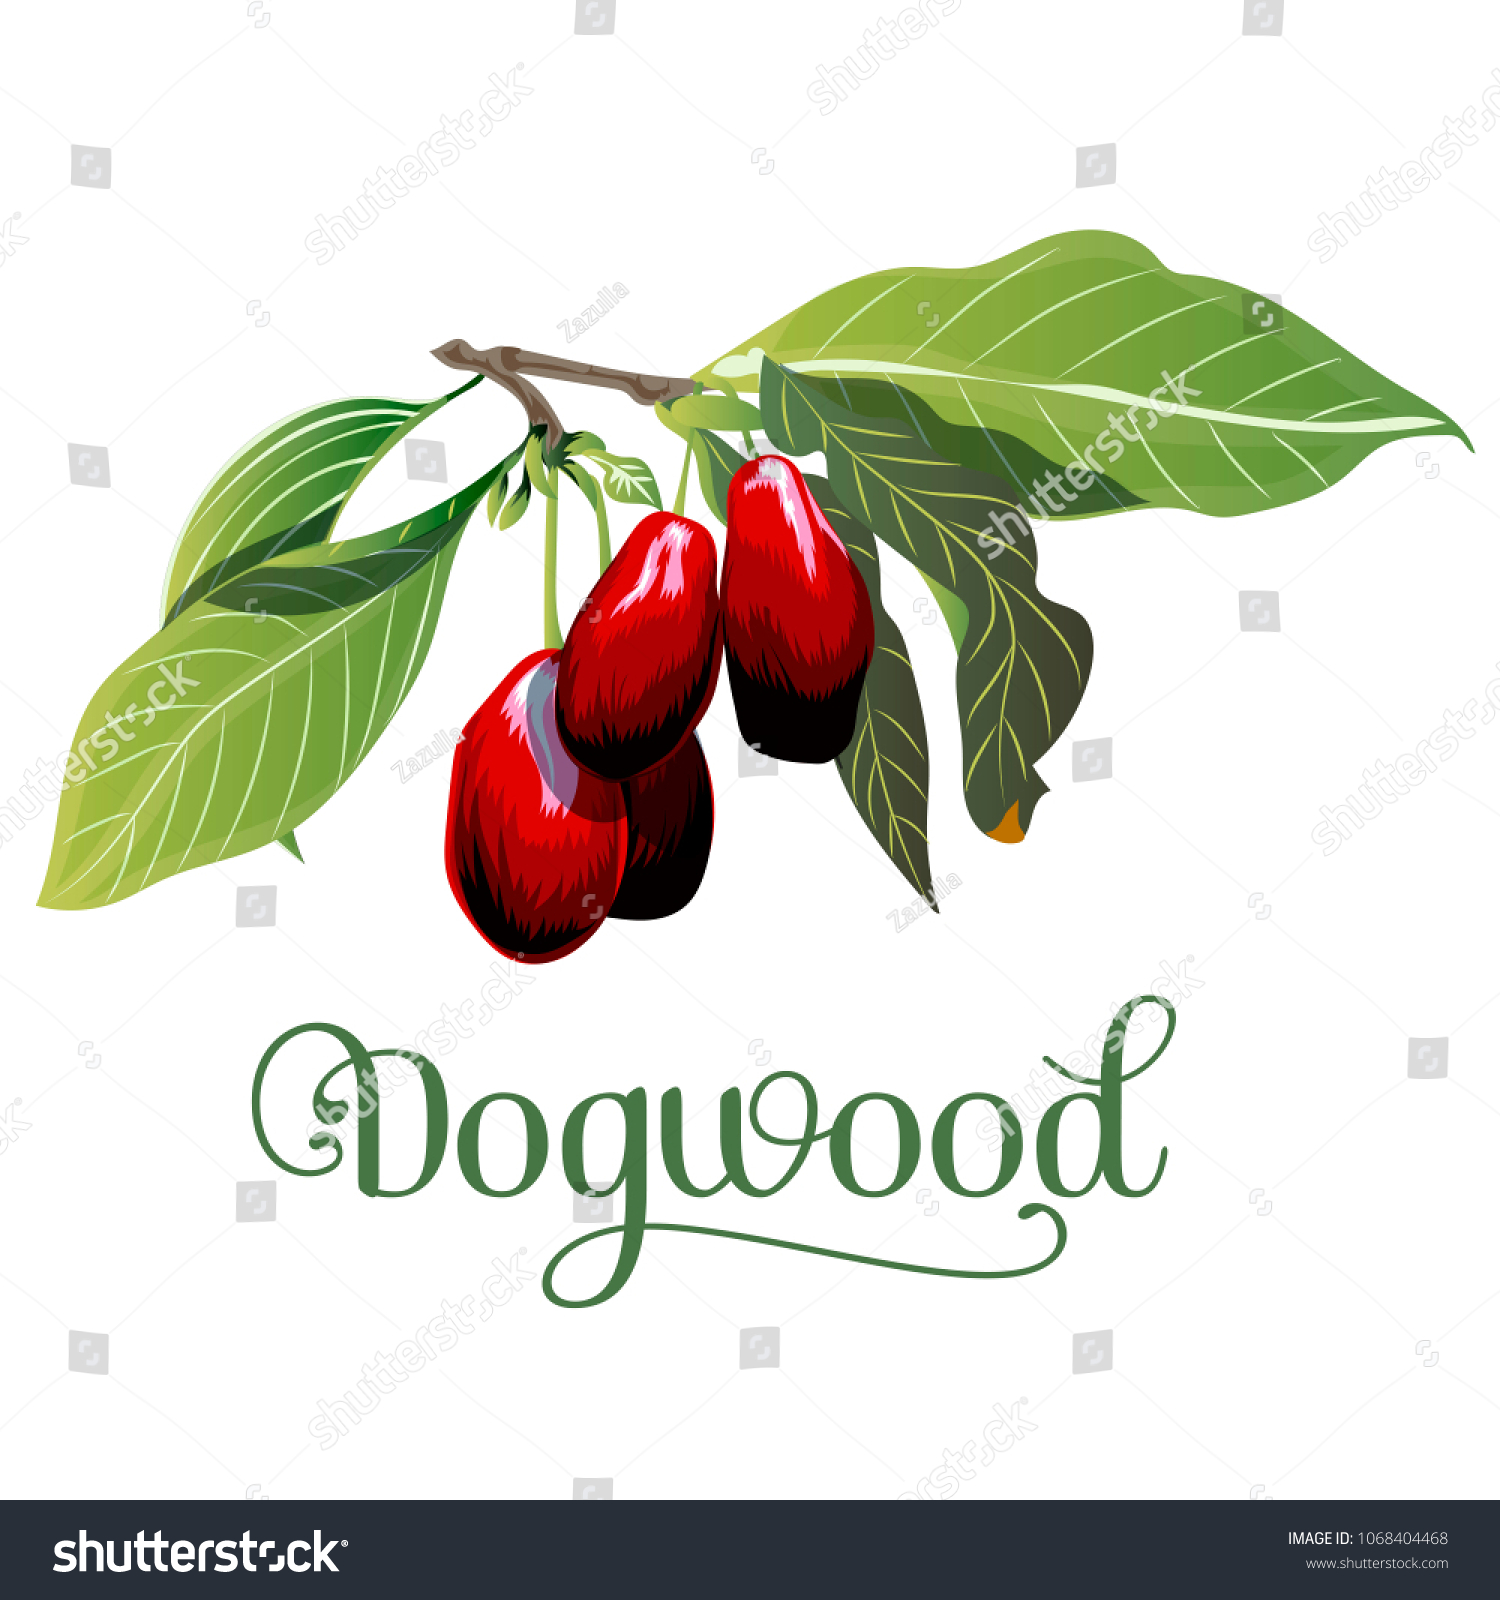 SVG of dogwood, leaves and berries isolated on white background. svg